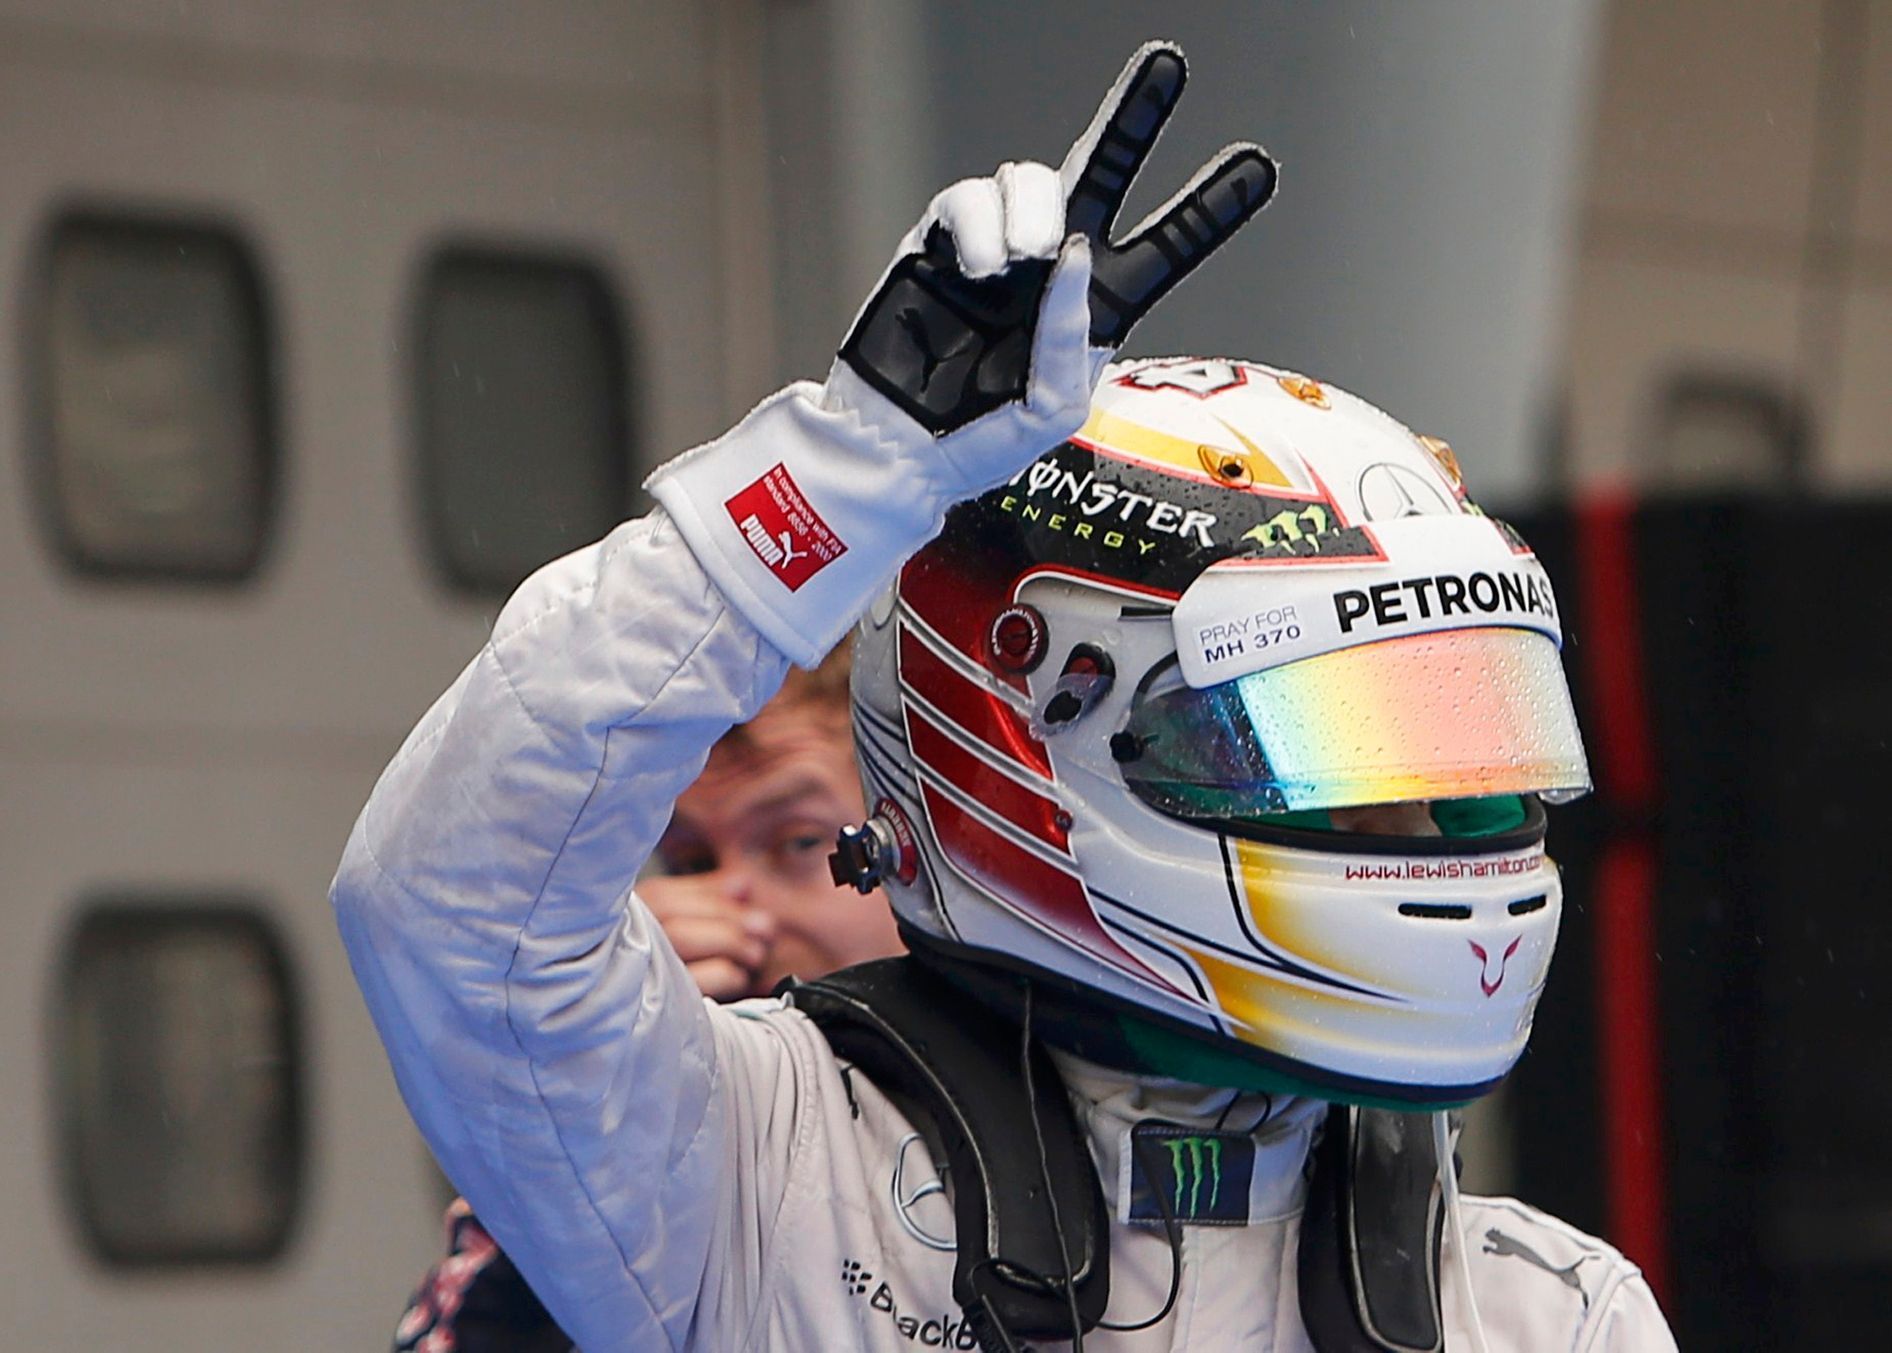 Mercedes Formula One driver Hamilton gestures after the qualifying session for the Malaysian F1 Grand Prix at Sepang International Circuit outside Kuala Lumpur